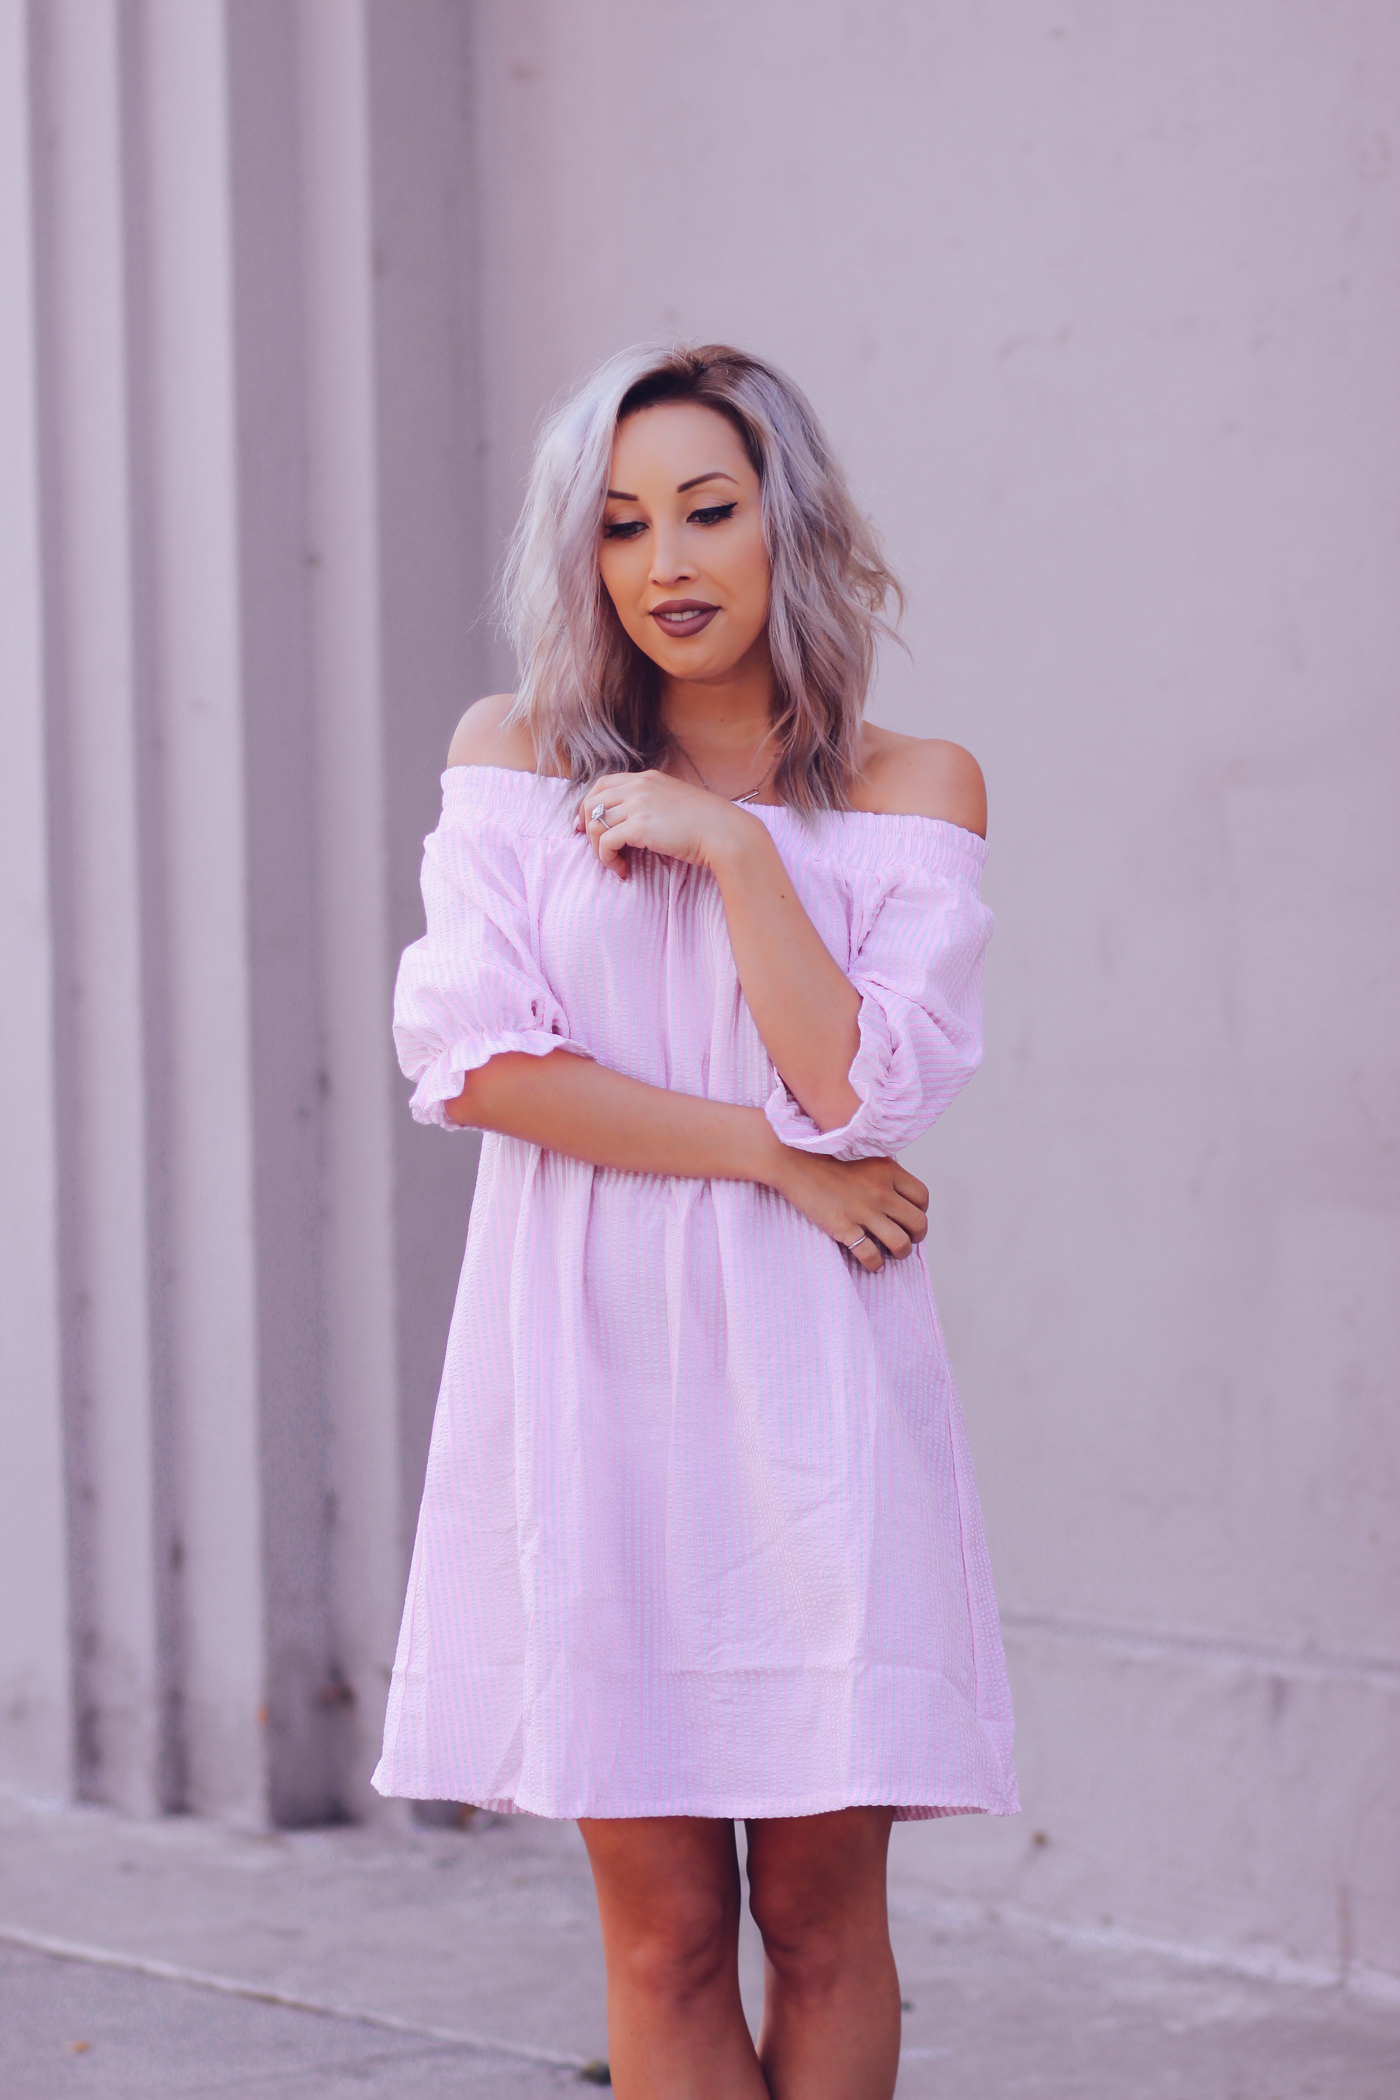 Blondie in the City | Pink Stripe Off The Shoulder Dress | Pink Christian Louboutin's